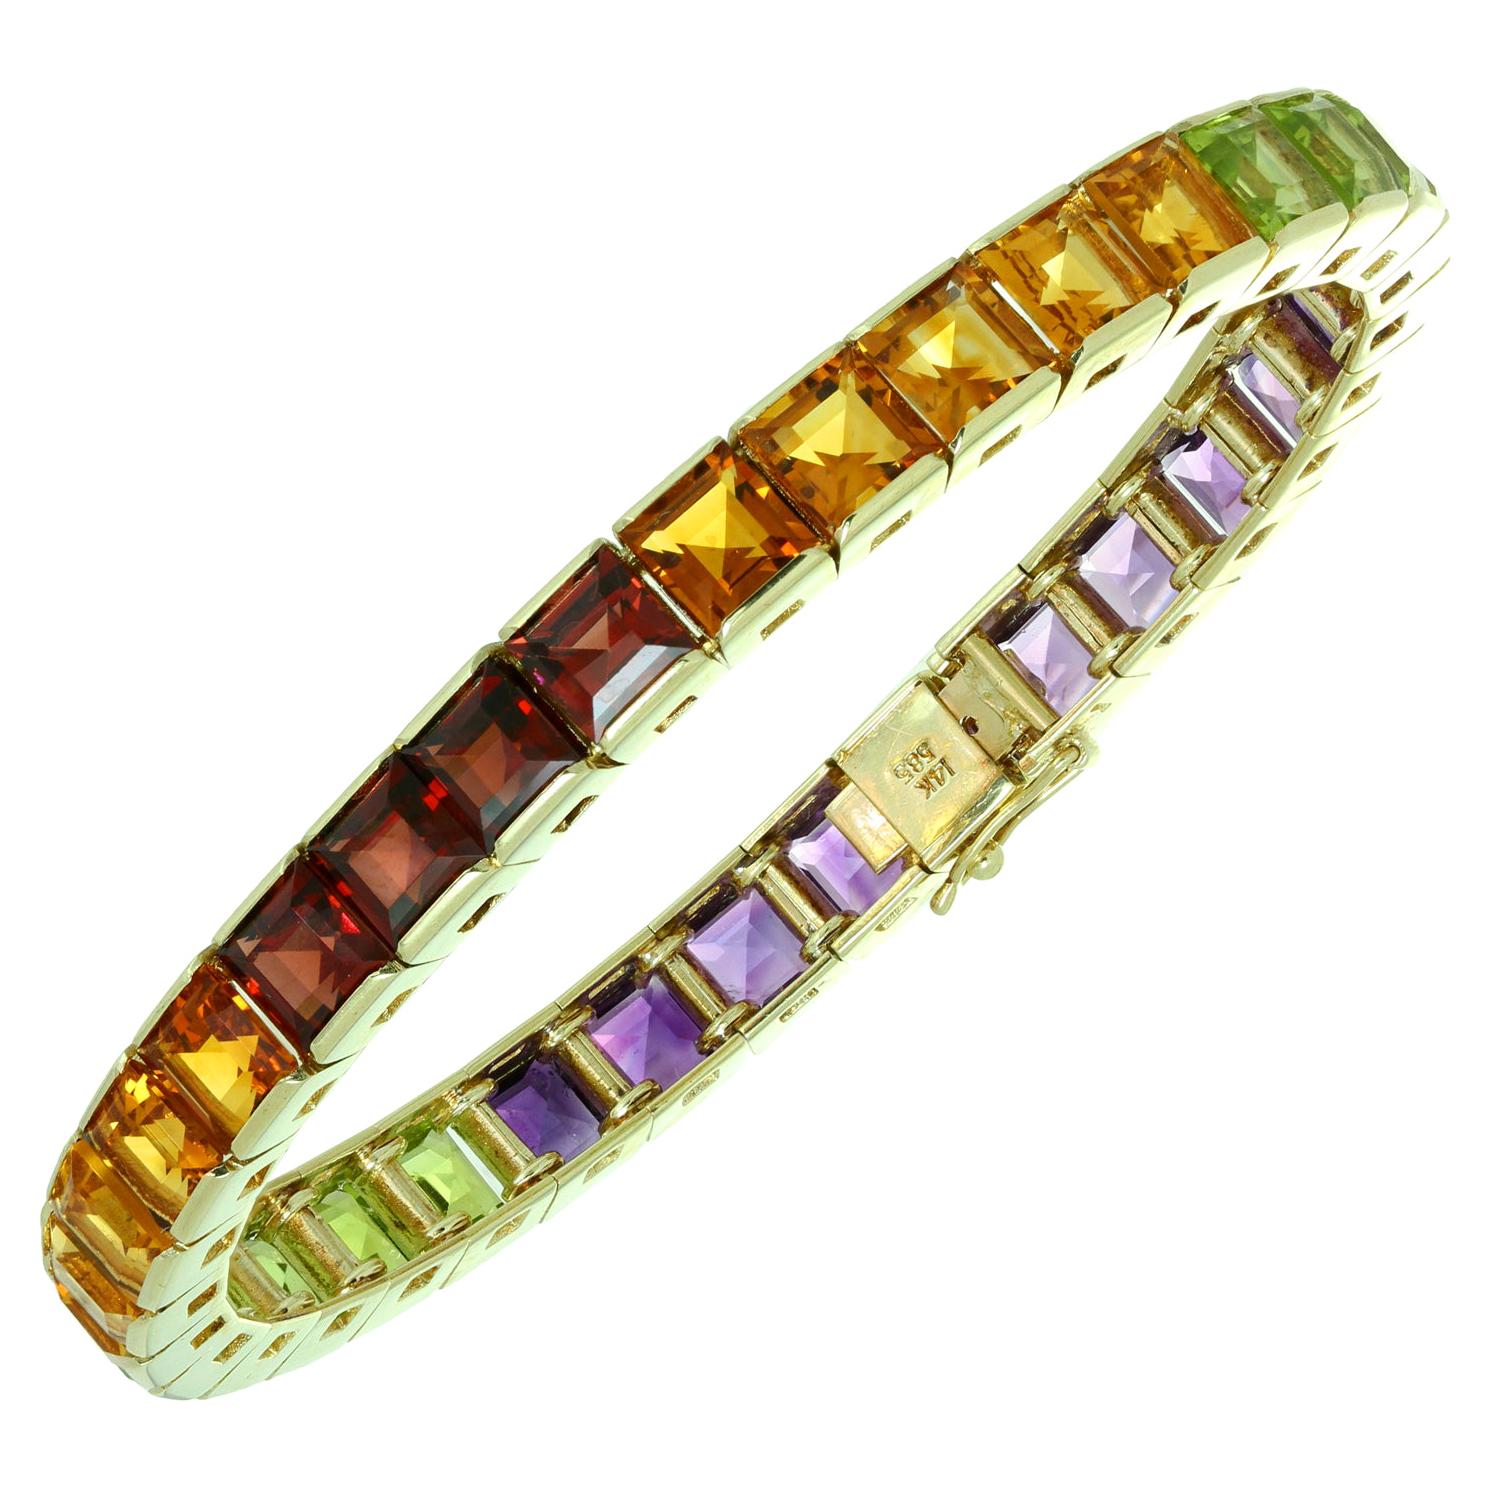 Sold at Auction: H.STERN ROCK CRYSTAL AND DIAMOND 'COBBLESTONES' BRACELET